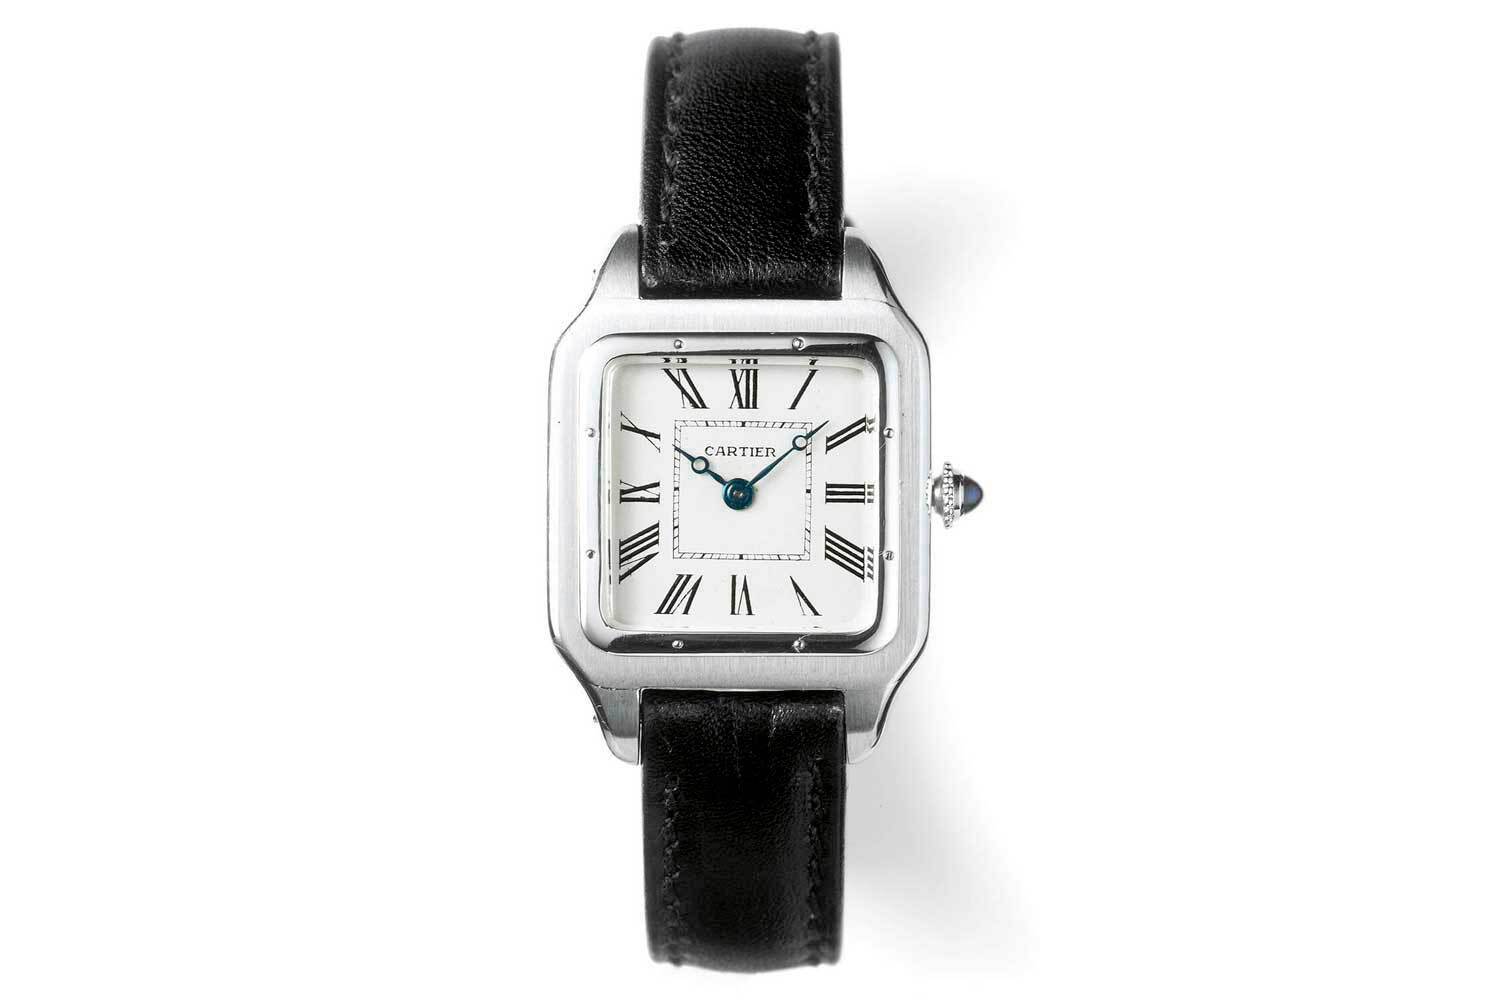 The Cartier Santos was the world’s first square watch meant to be worn on the wrist - Vote now: Smartwatch design - Round vs Square!